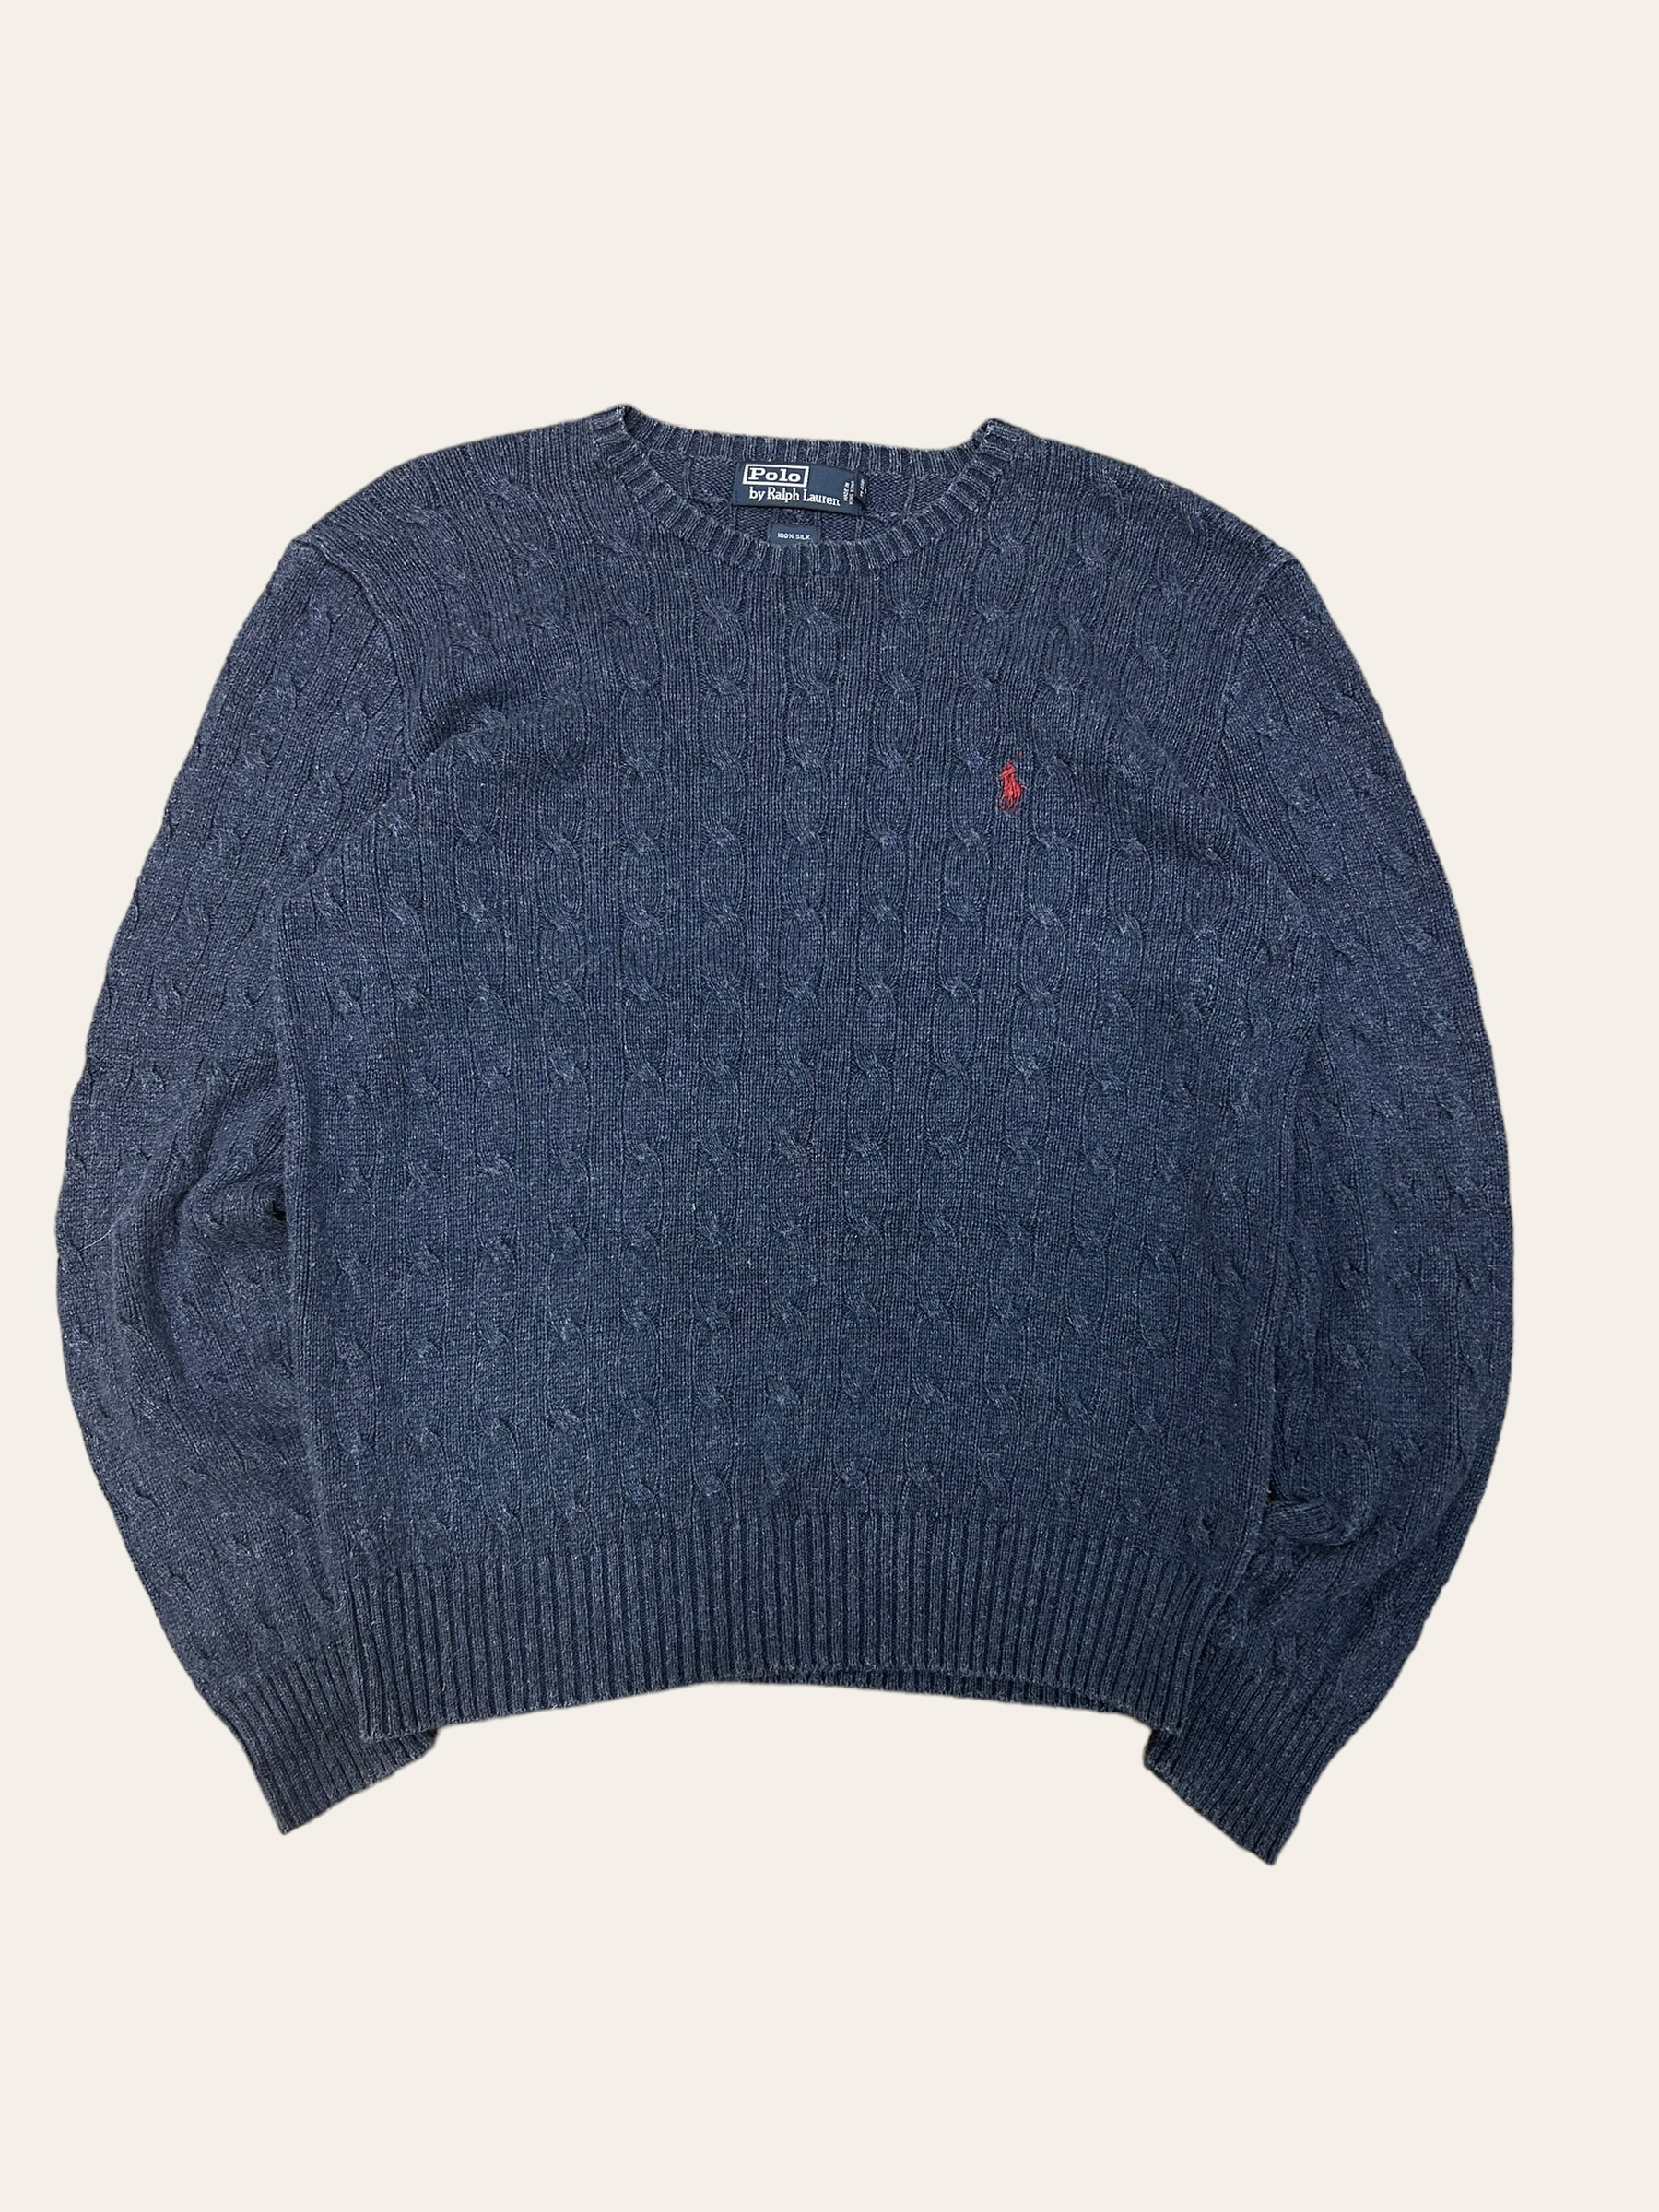 Polo ralph lauren navy silk cable sweater M